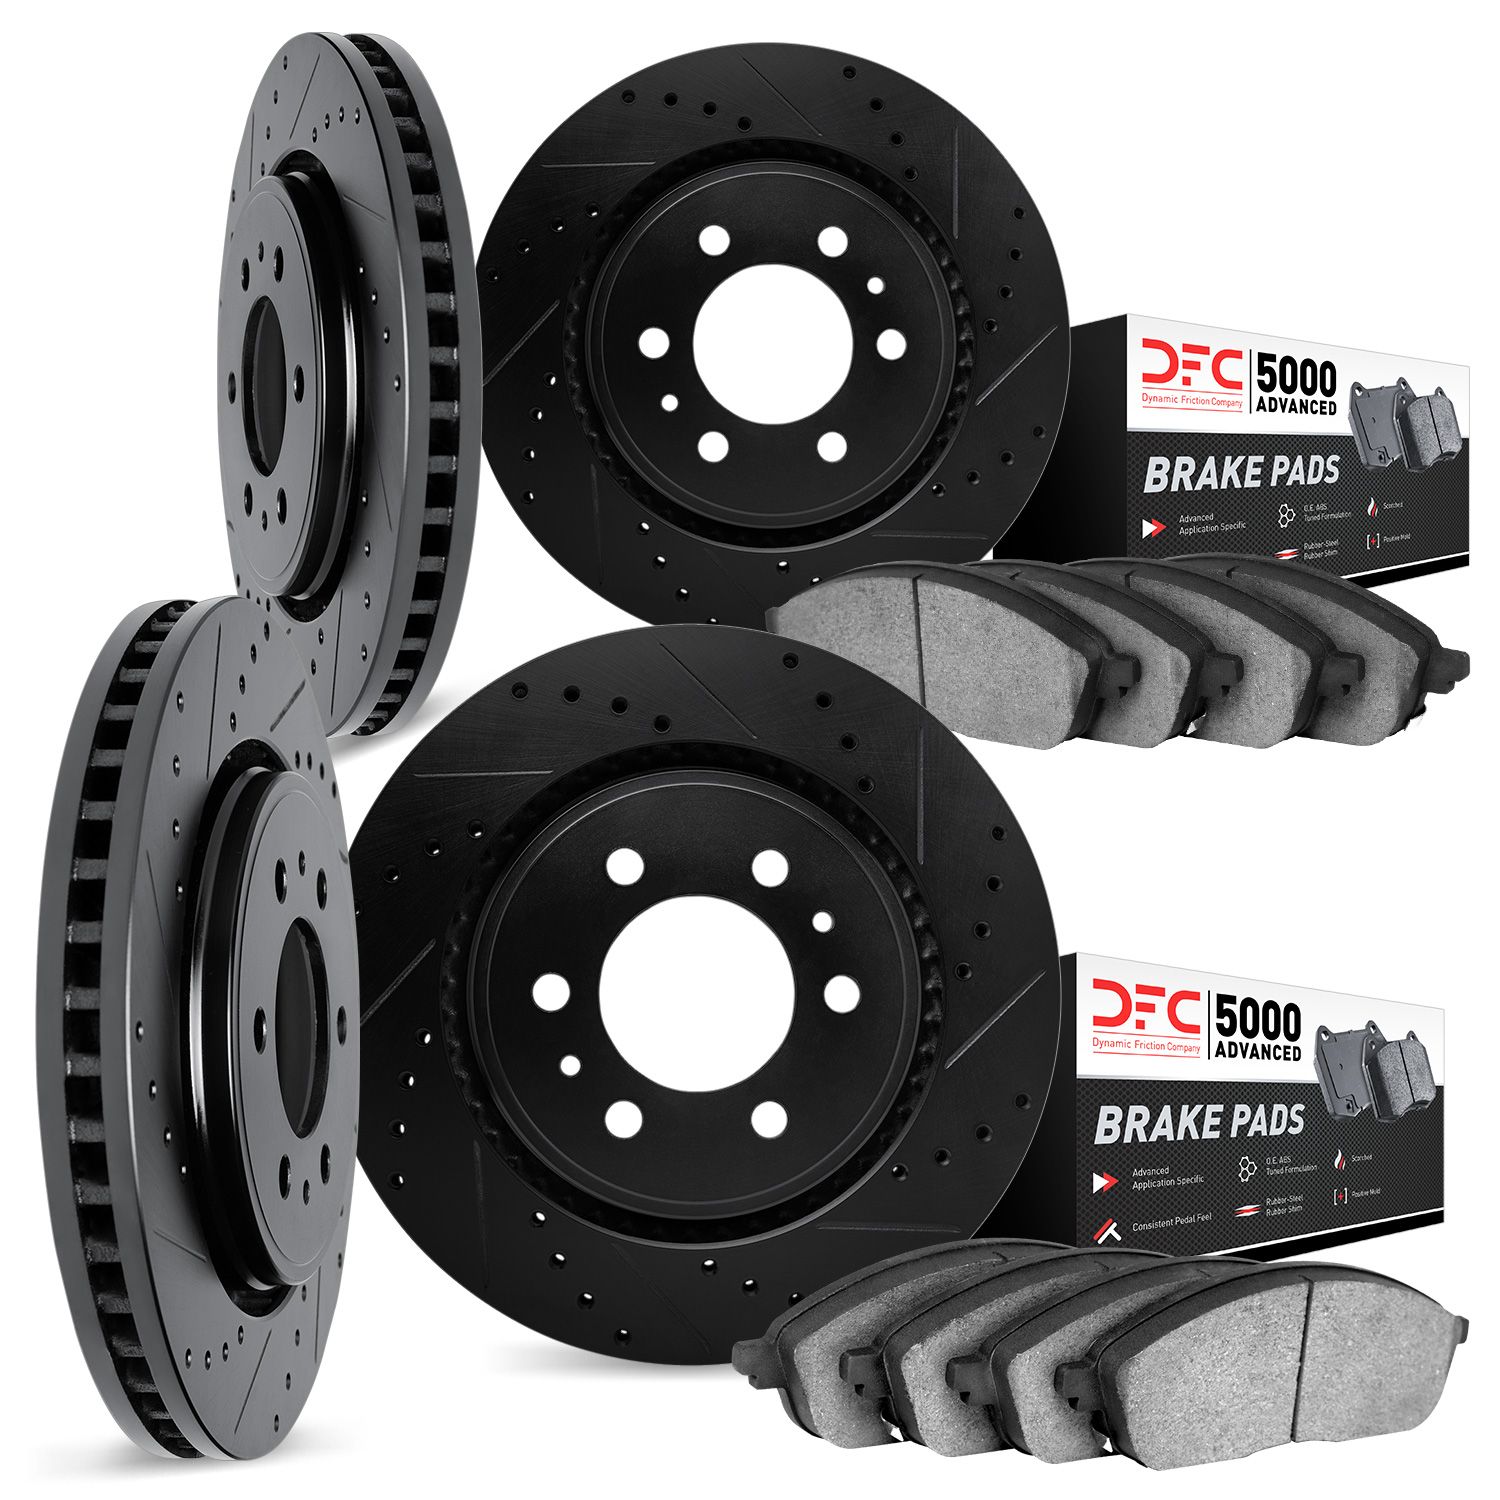 8504-47260 Drilled/Slotted Brake Rotors w/5000 Advanced Brake Pads Kit [Black], 2006-2009 GM, Position: Front and Rear